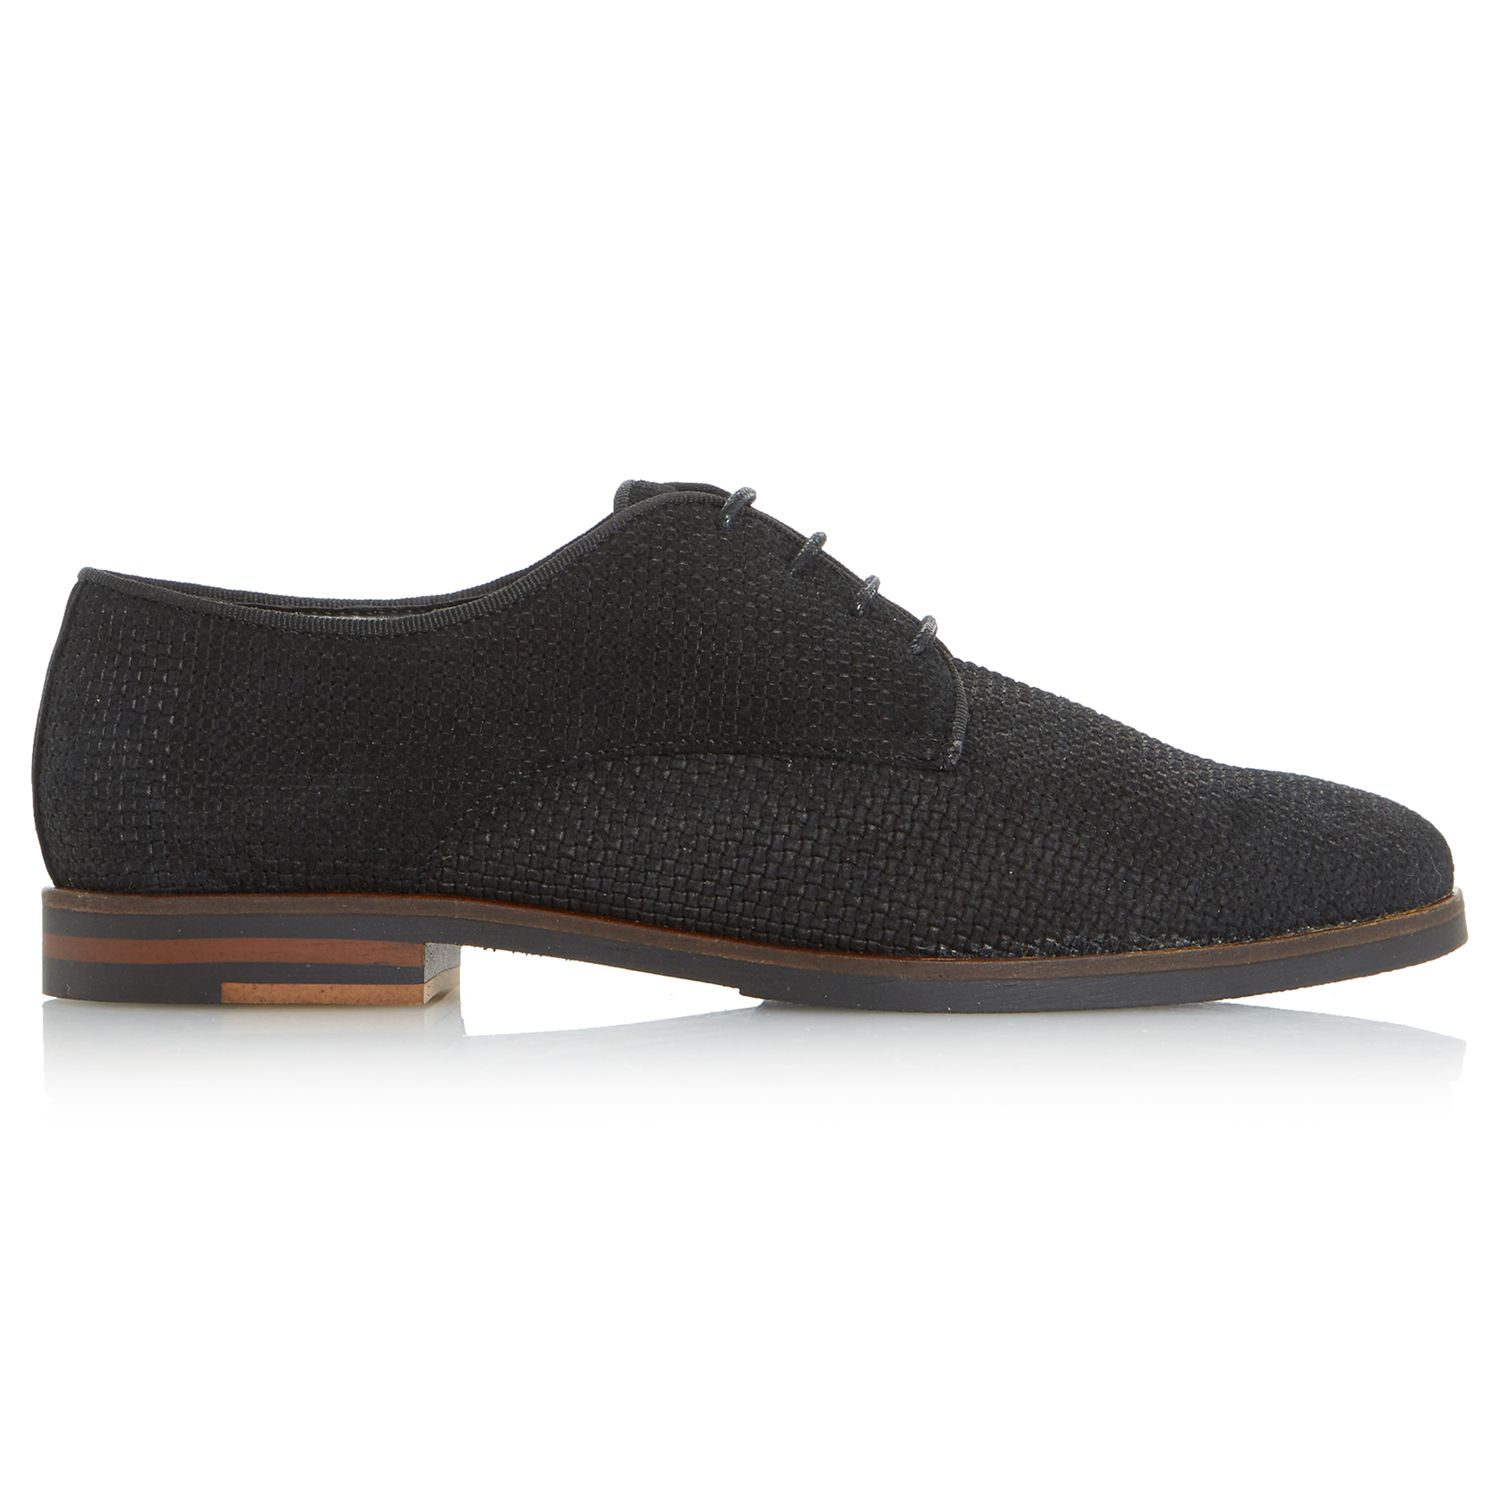 Dune Fadia Lace Up Brogues